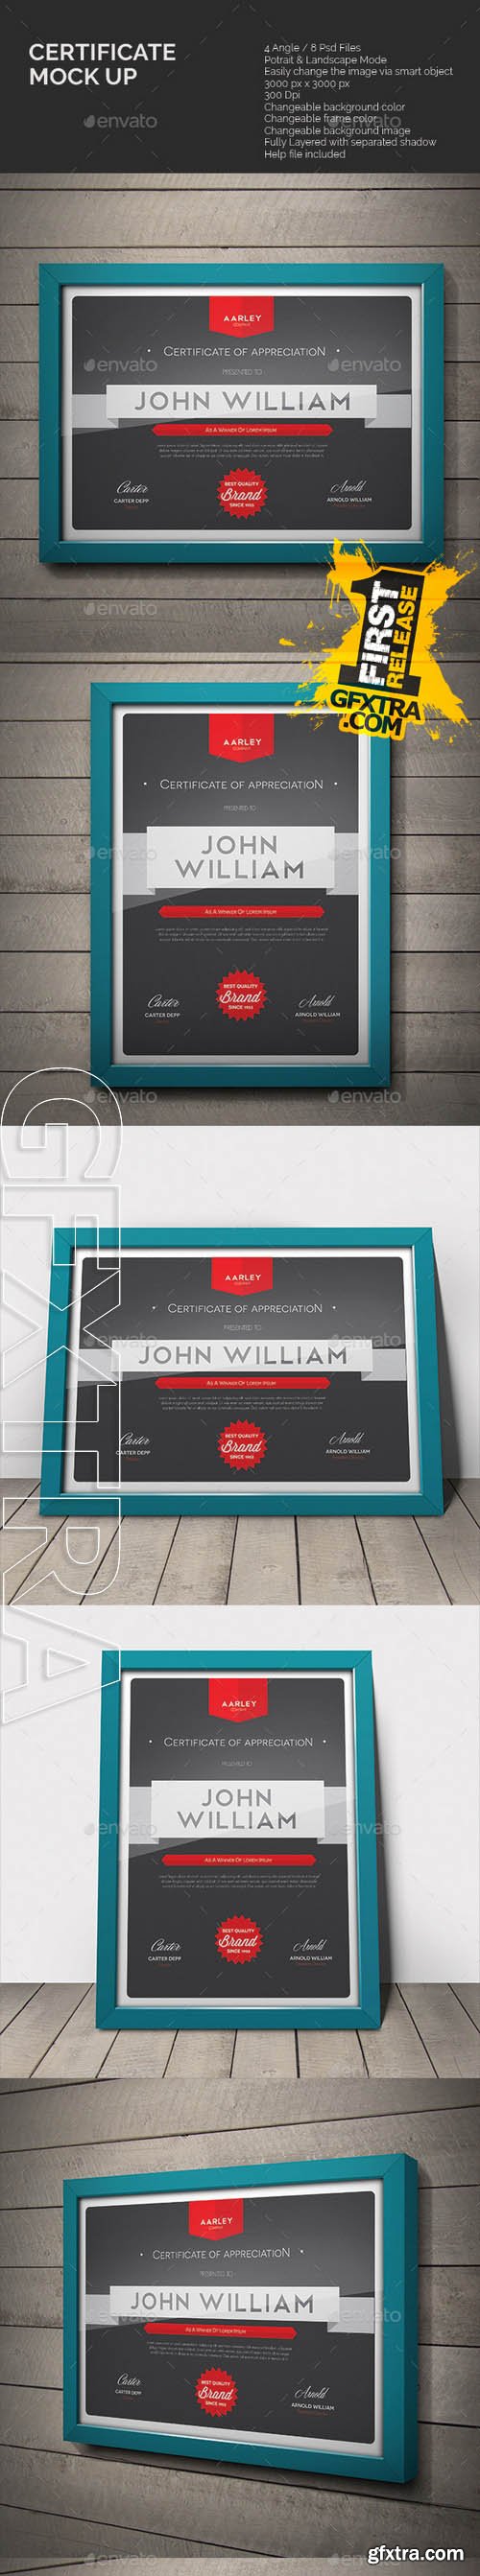 Certificate Mock-up - Graphicriver 10563422